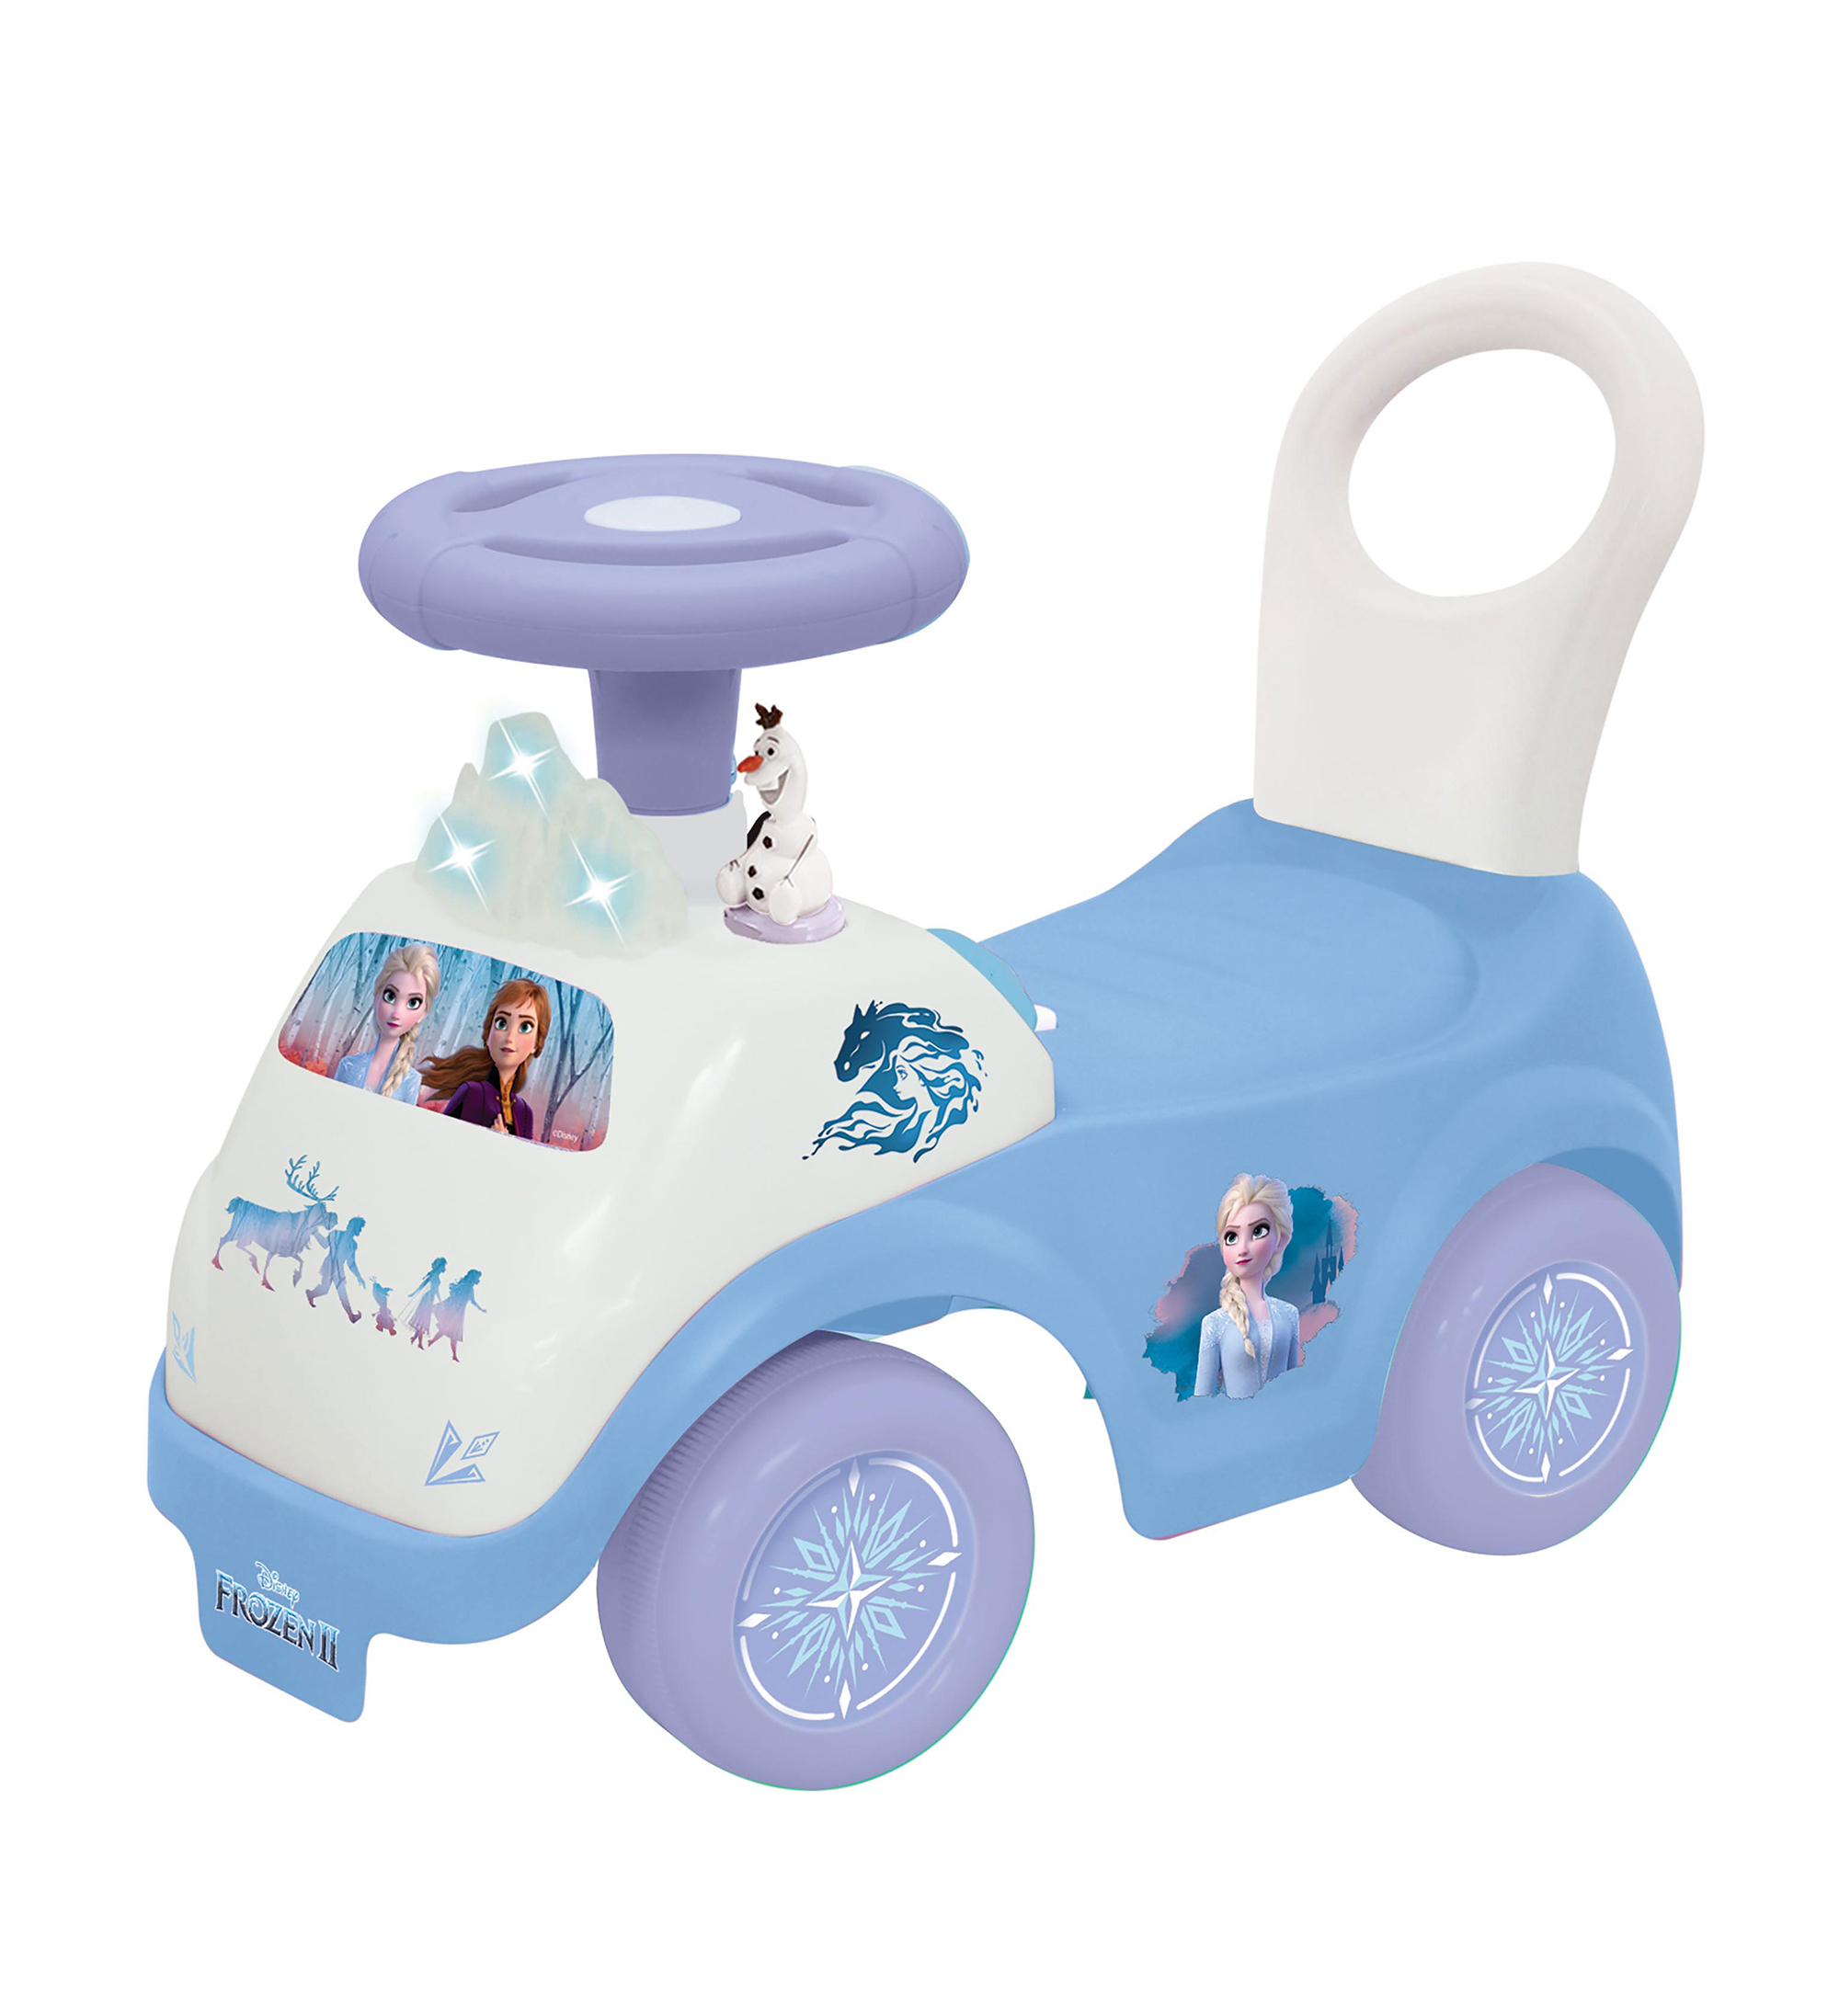 Kiddieland Toys Frozen 2 Magical Lights and Sounds Snow Globe Ride-on Toy, Boys & Girls 1 Years and up - image 1 of 3